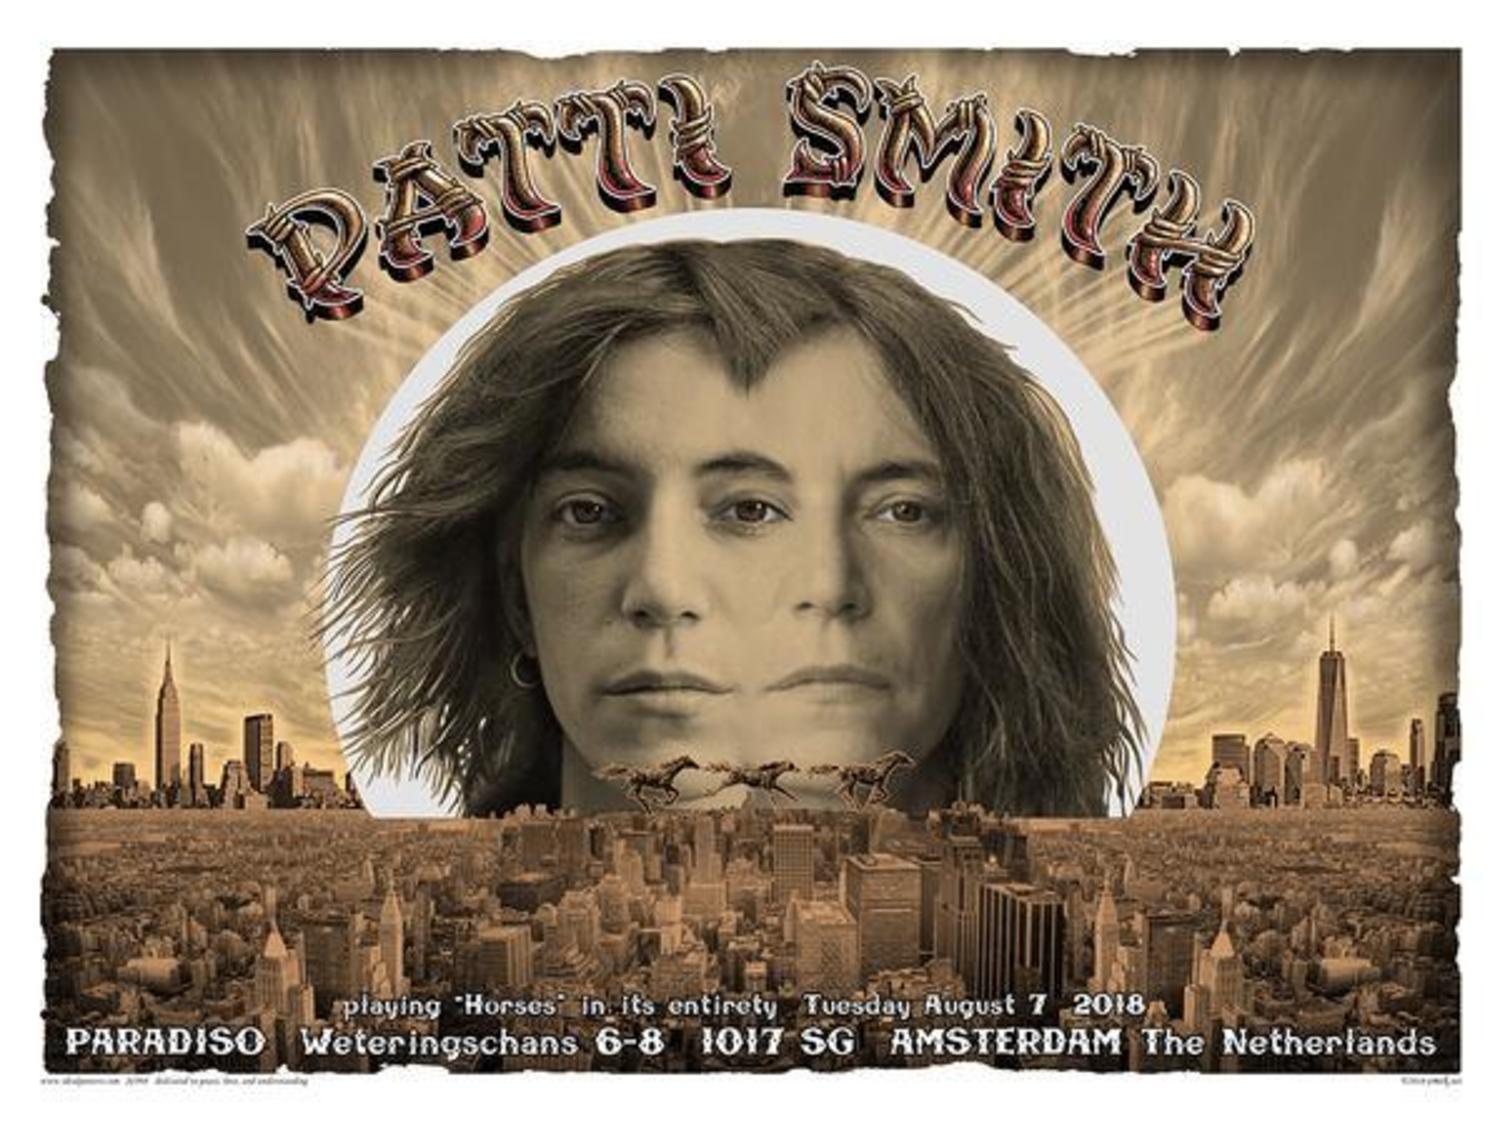 EMEK – 2018 “Sunset” Patti Smith Limited Edition Concert Poster